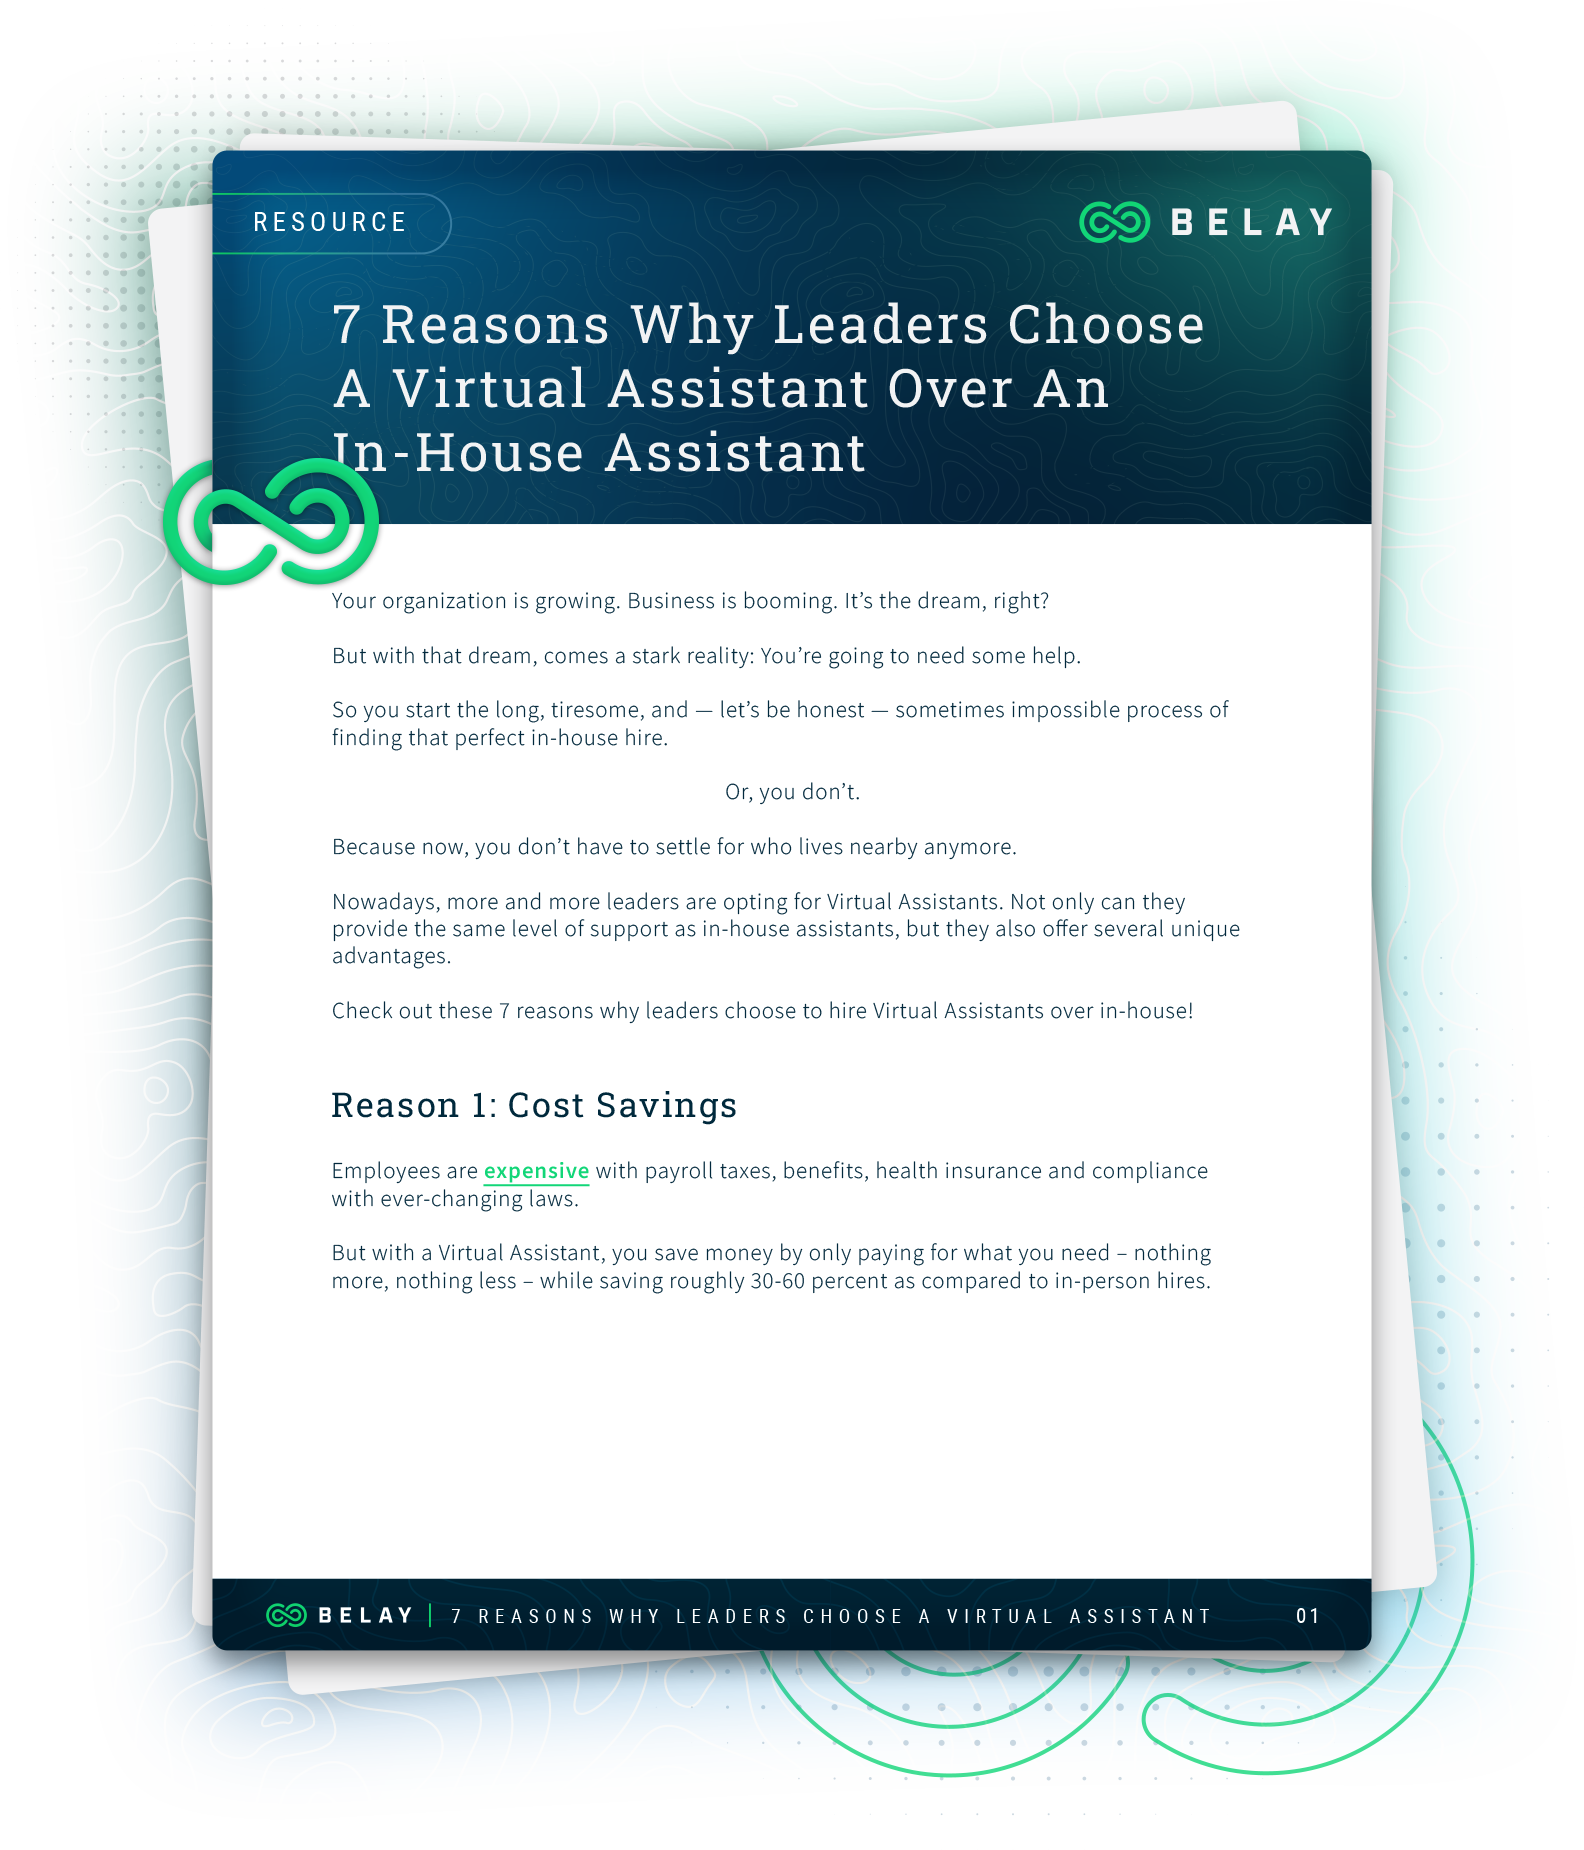 5 Reasons Why Leaders Choose A Virtual Assistant Over An In-House Assistant